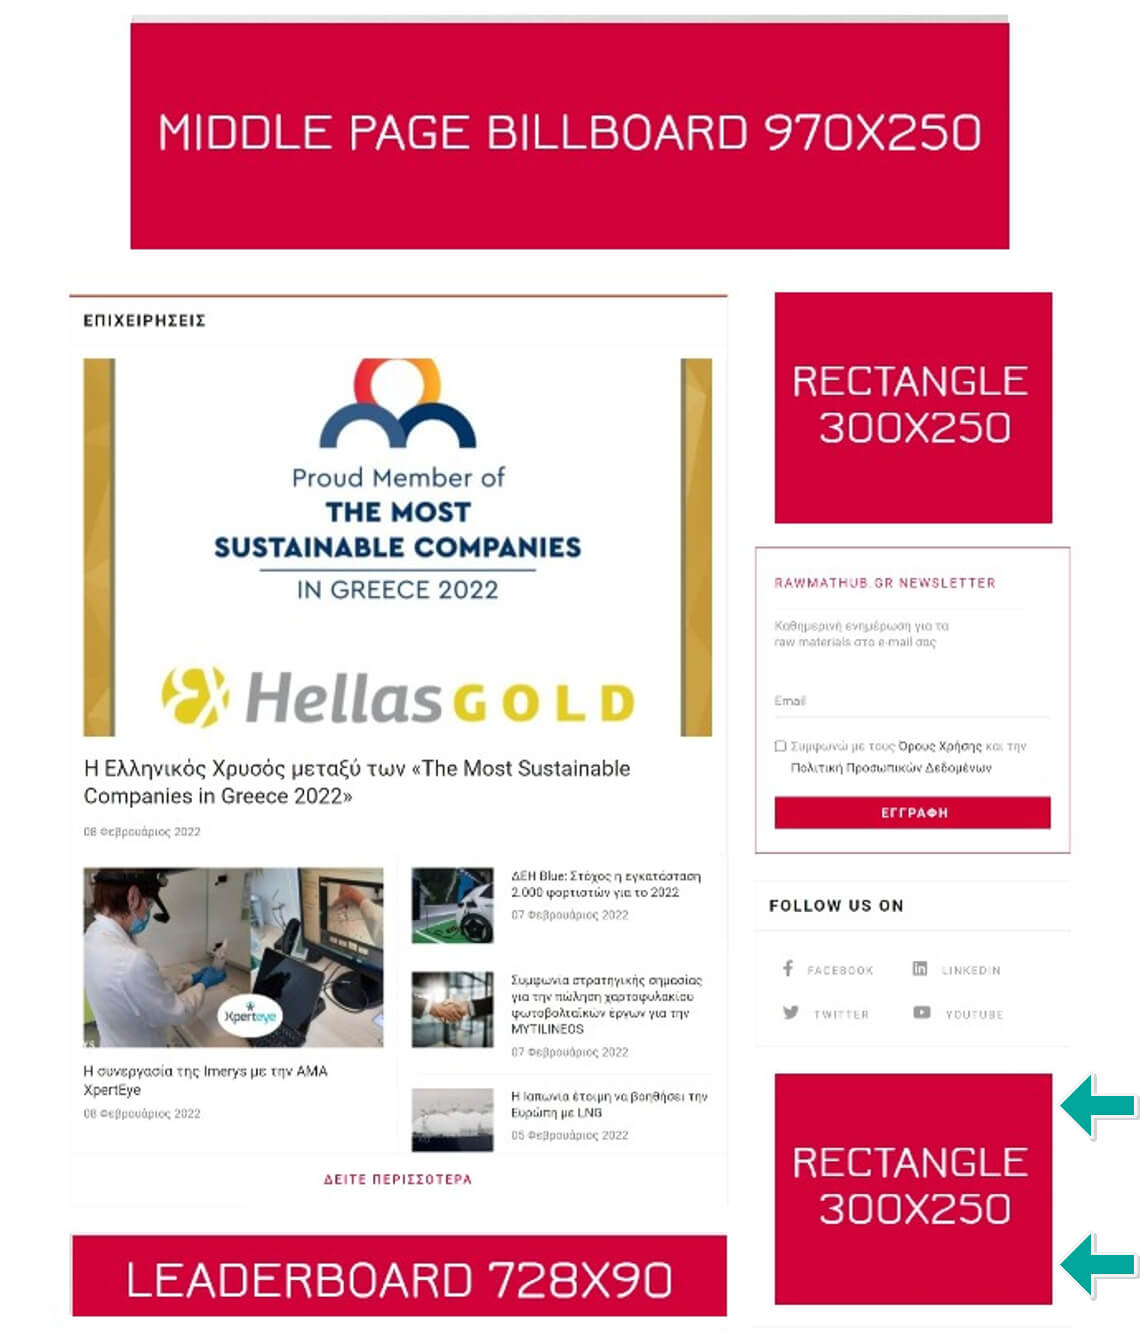 home_page_banner_positions_bottom_rectangle_300x250.jpg